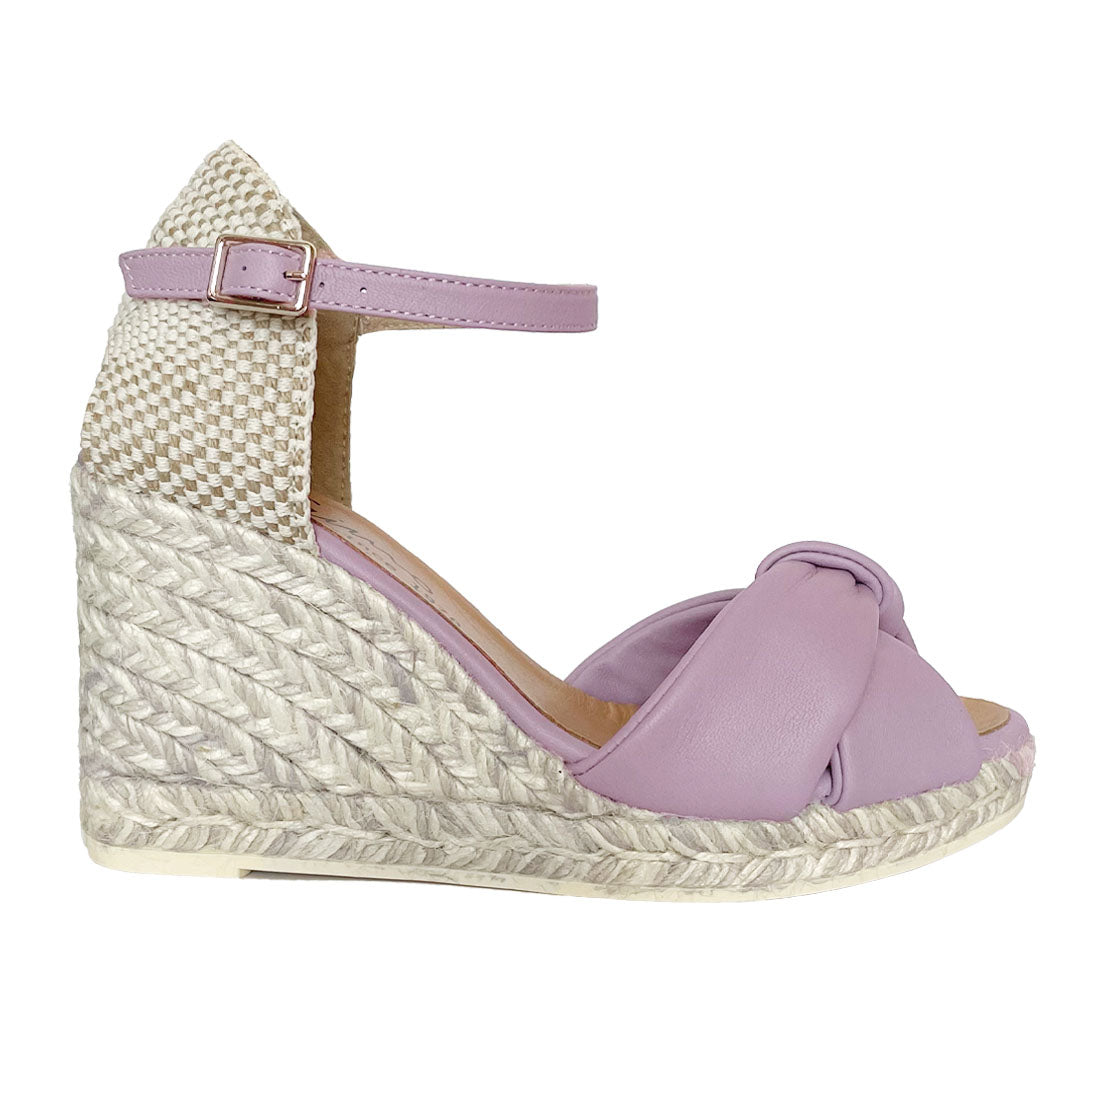 beautiful and comfortable espadrilles wedges in lilac